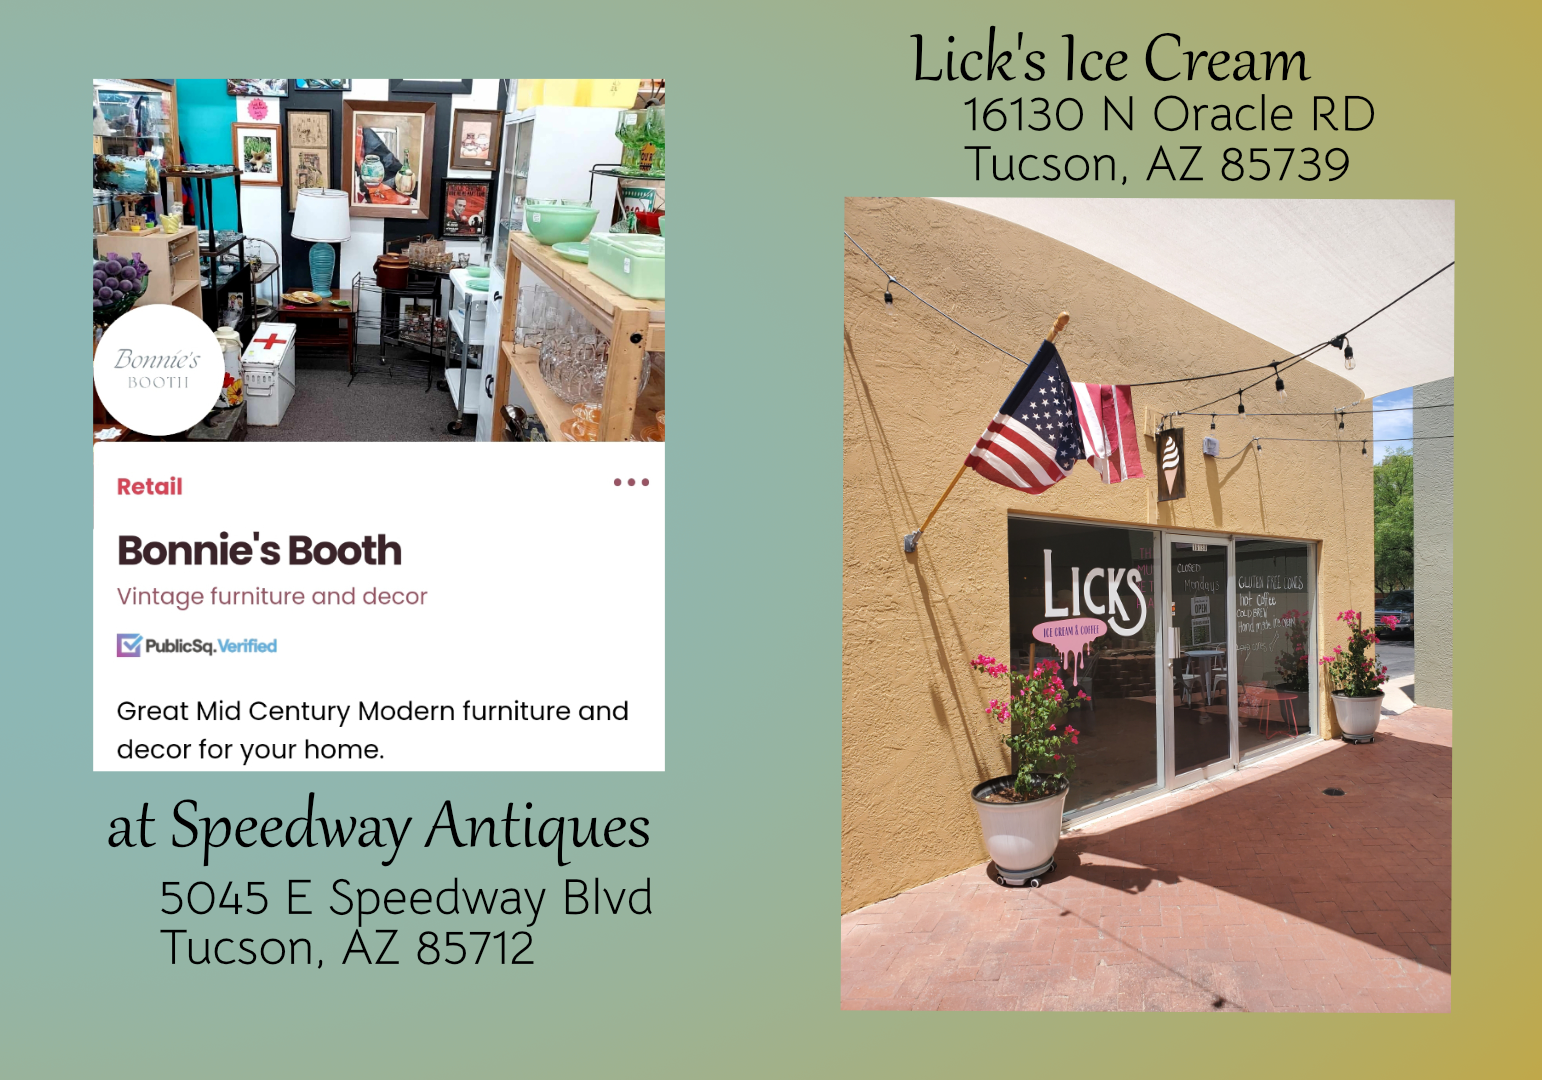 Bonnie's Booth at Speedway Antiques and Lick's Ice Cream and Coffee